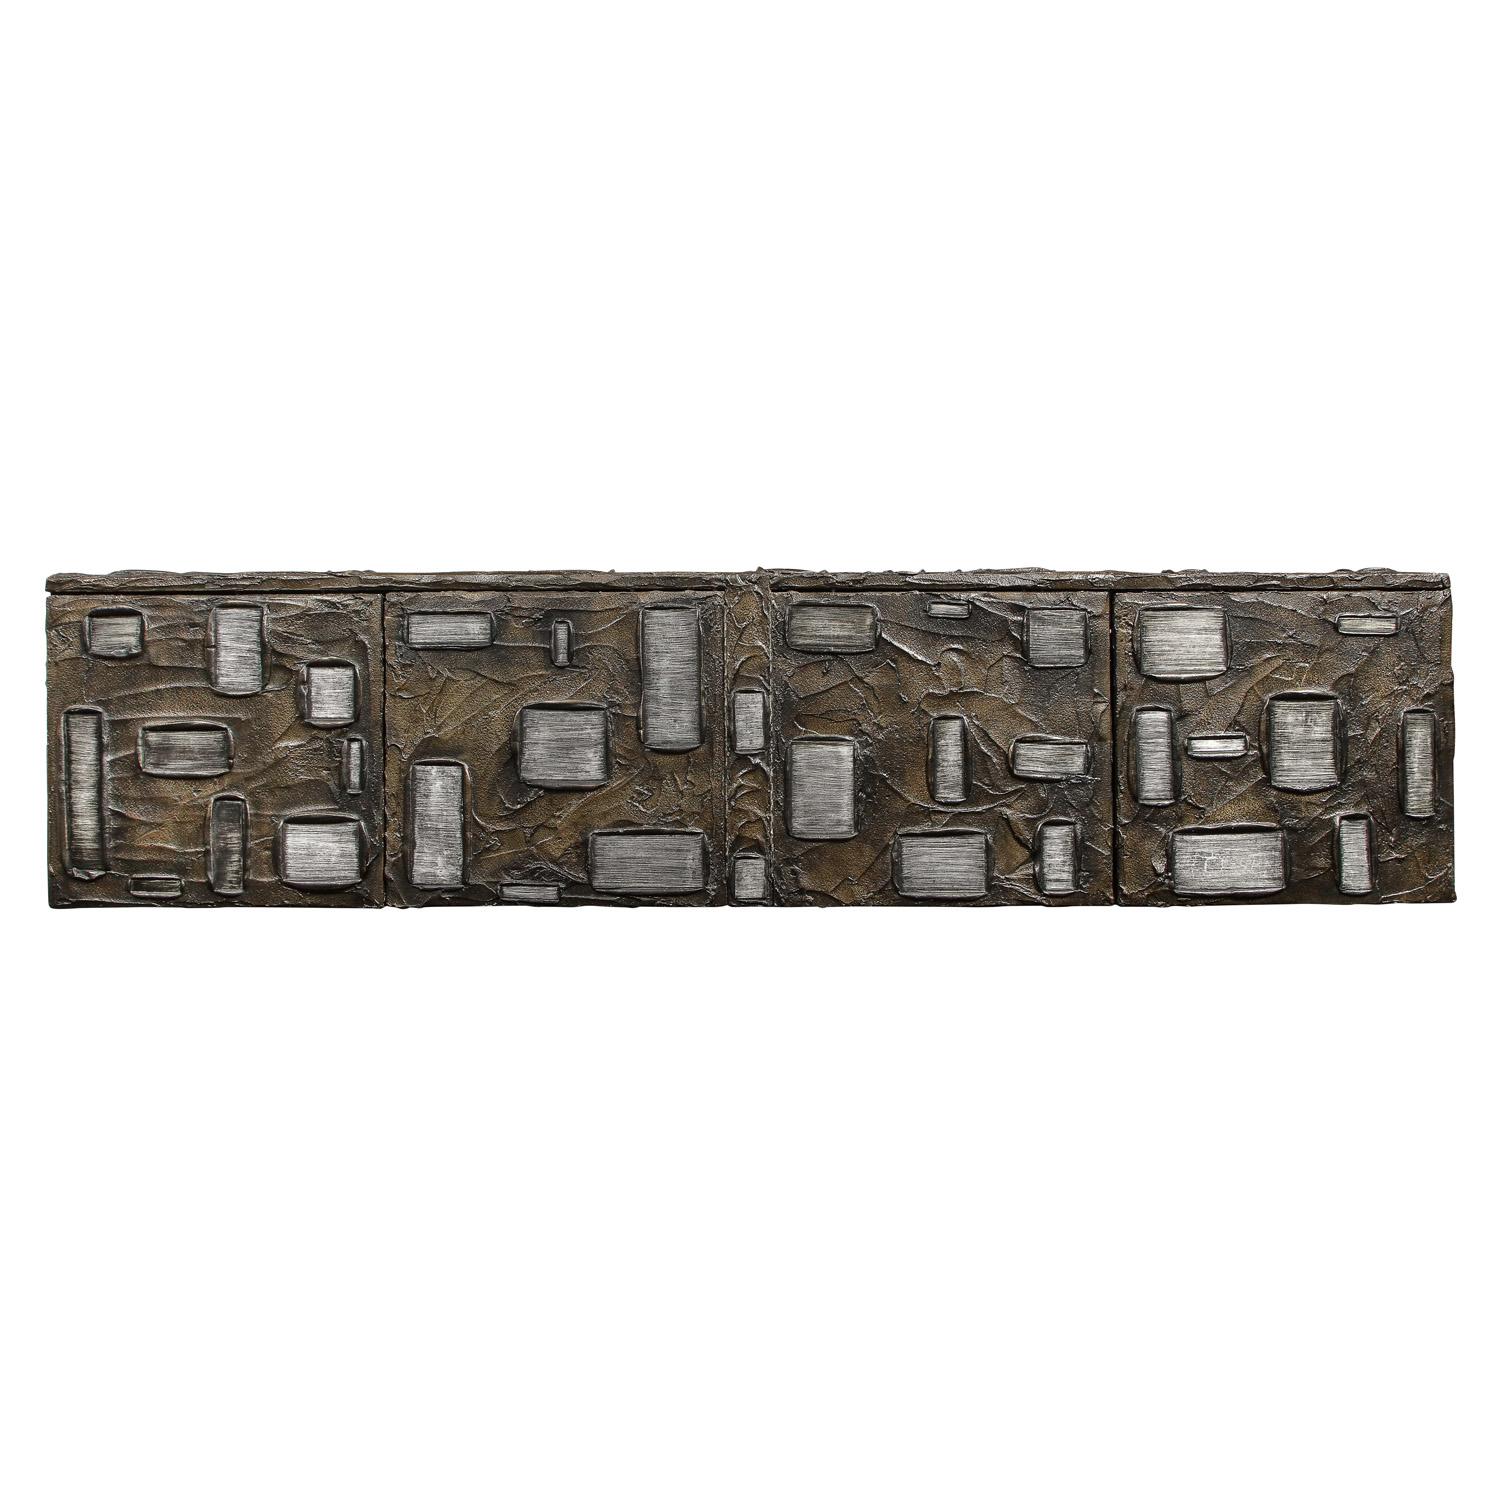 Rare and important large sculpted bronze wall cabinet with enameled steel elements and 3 cleft slate top pieces by Paul Evans Studio for Direction Furniture, 1969 (signed “PE 69” on bottom). The gray steel elements set into the bronze resin are an